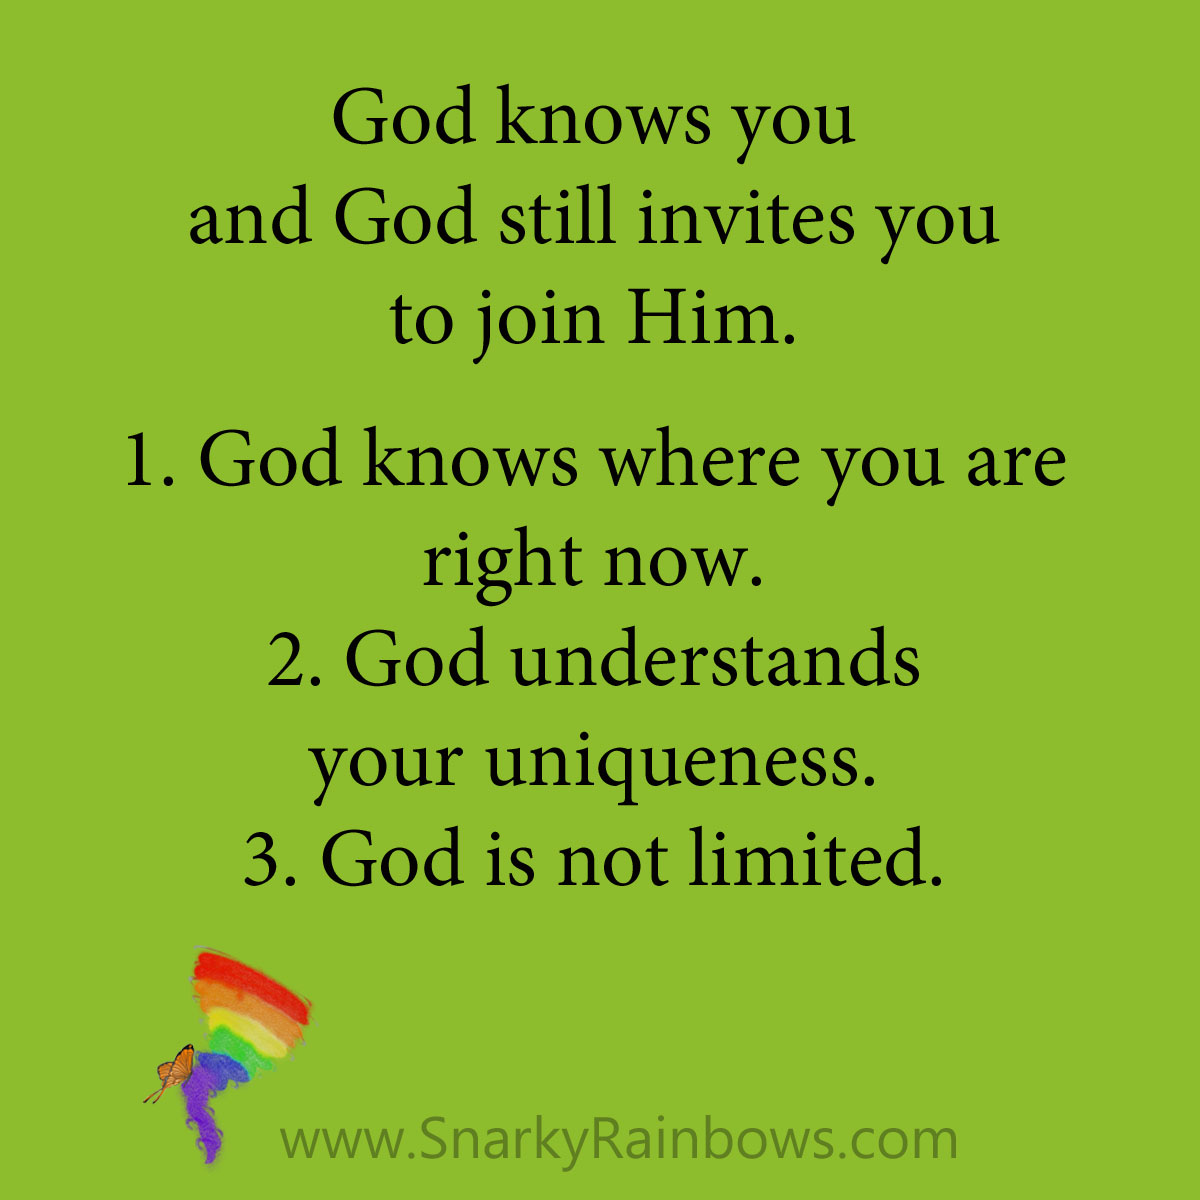 Growing HOPE Daily - quote - God knows you